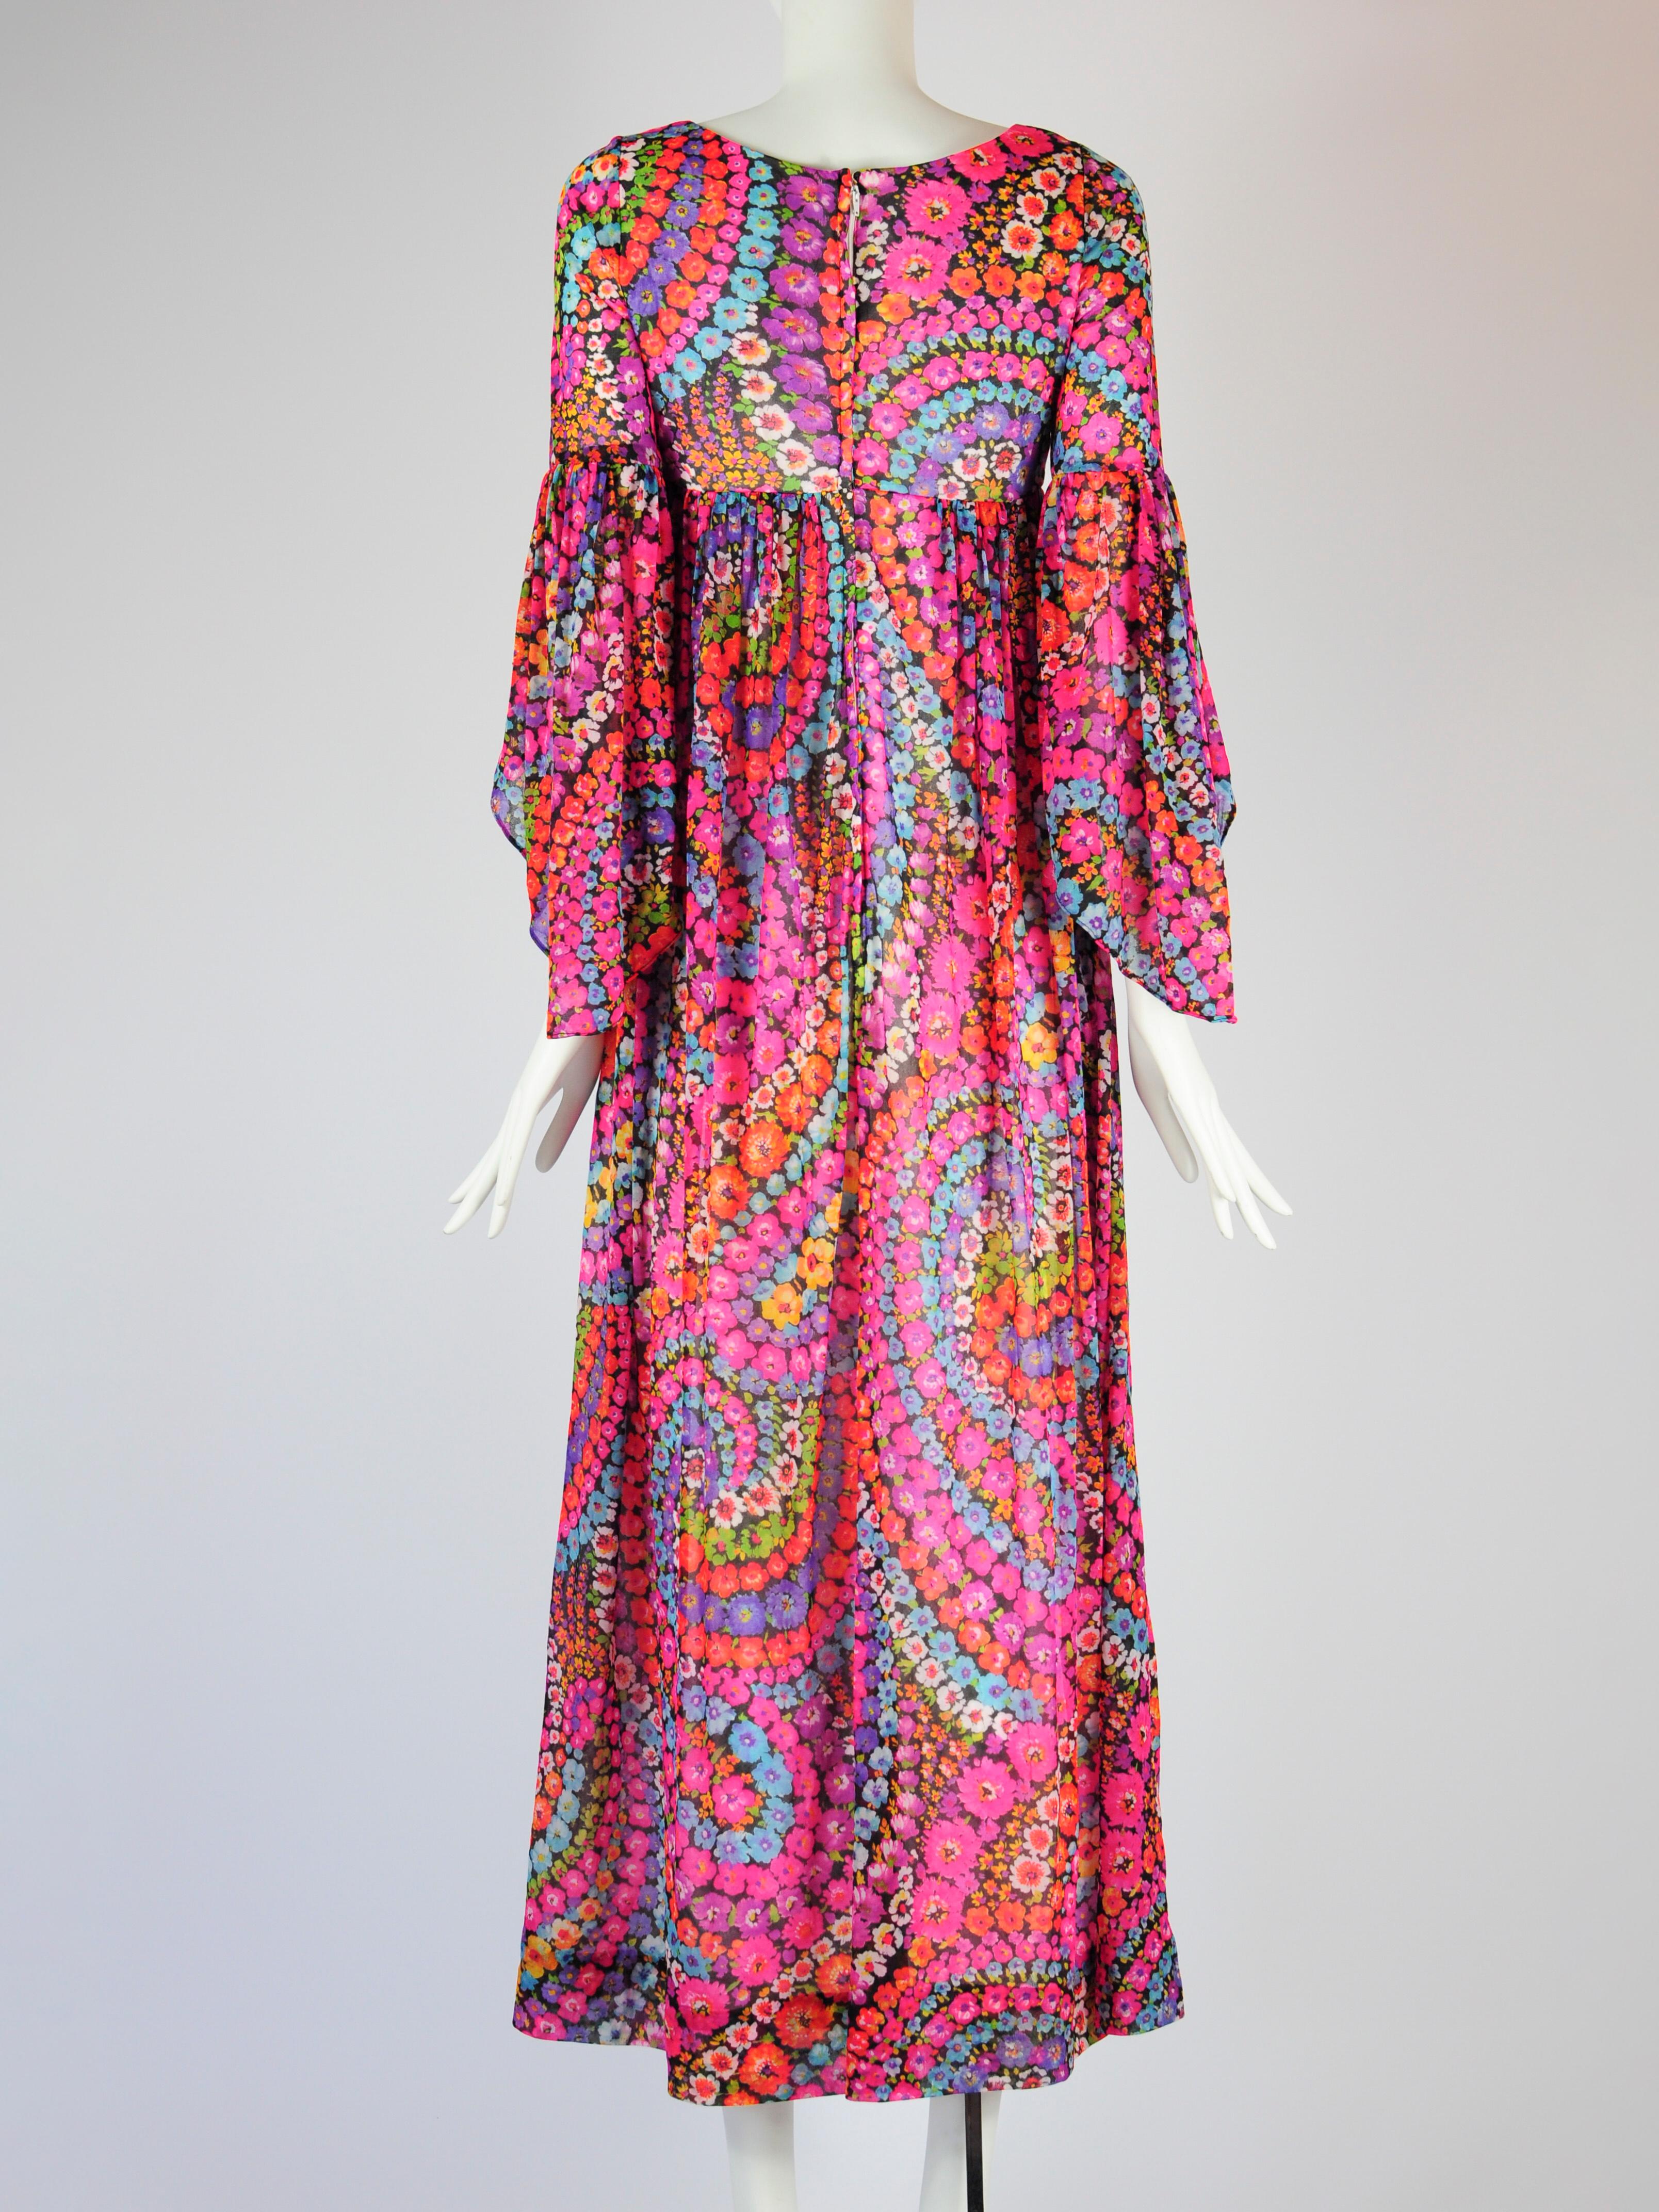 Psychedelic Flower Goddess Dress Empire Waist Butterfly Sleeve Quad London 1970s For Sale 4